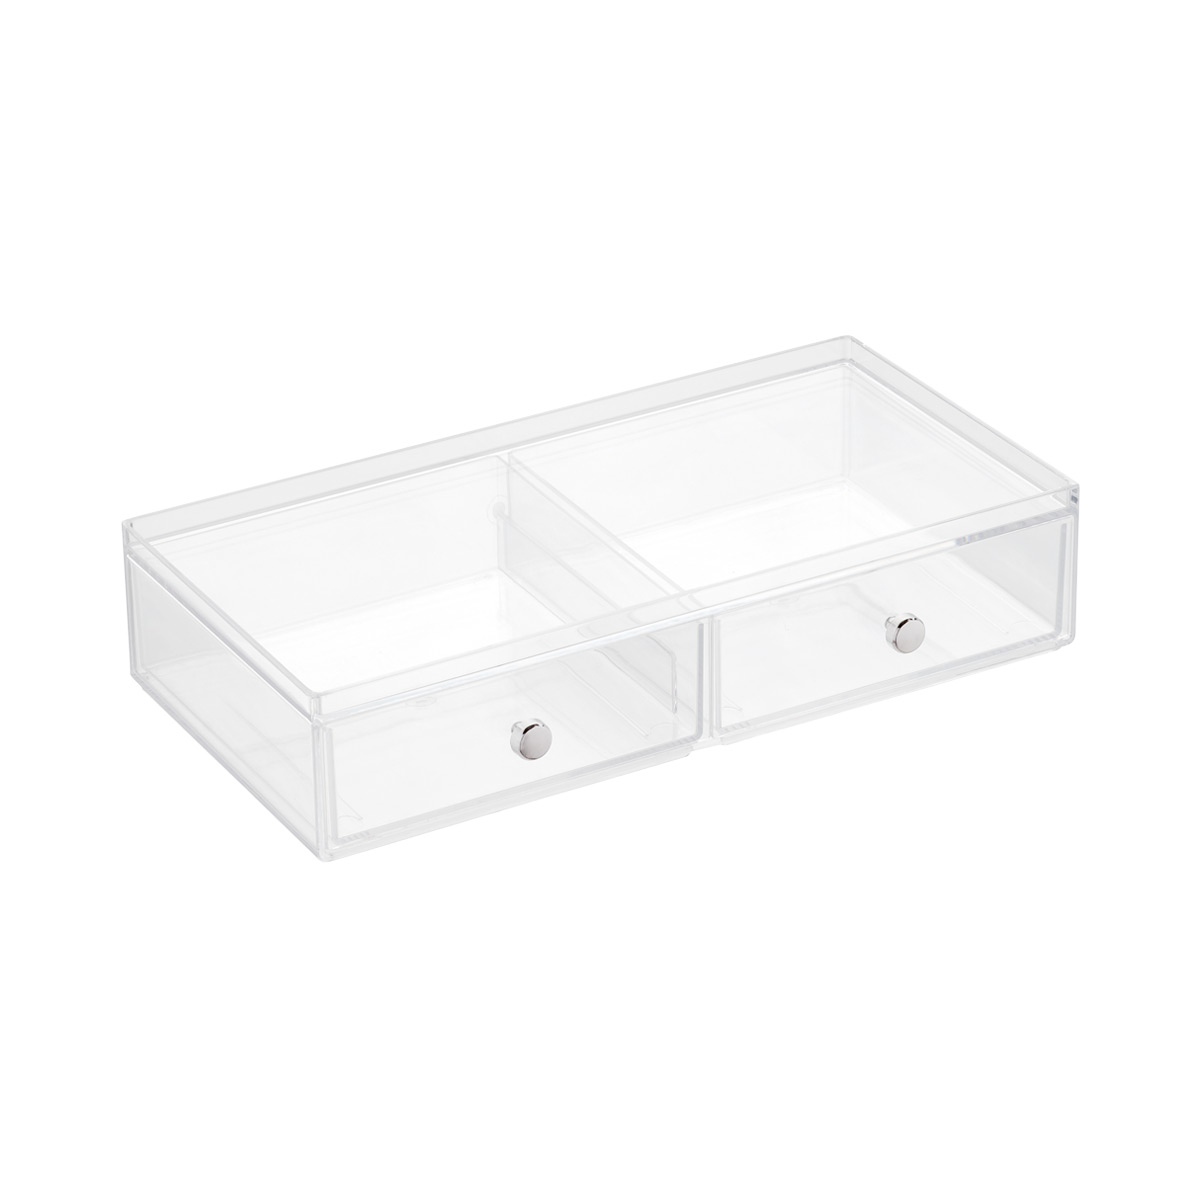 https://www.containerstore.com/catalogimages/336361/10064436-clarity-wide-2-drawer-stack.jpg